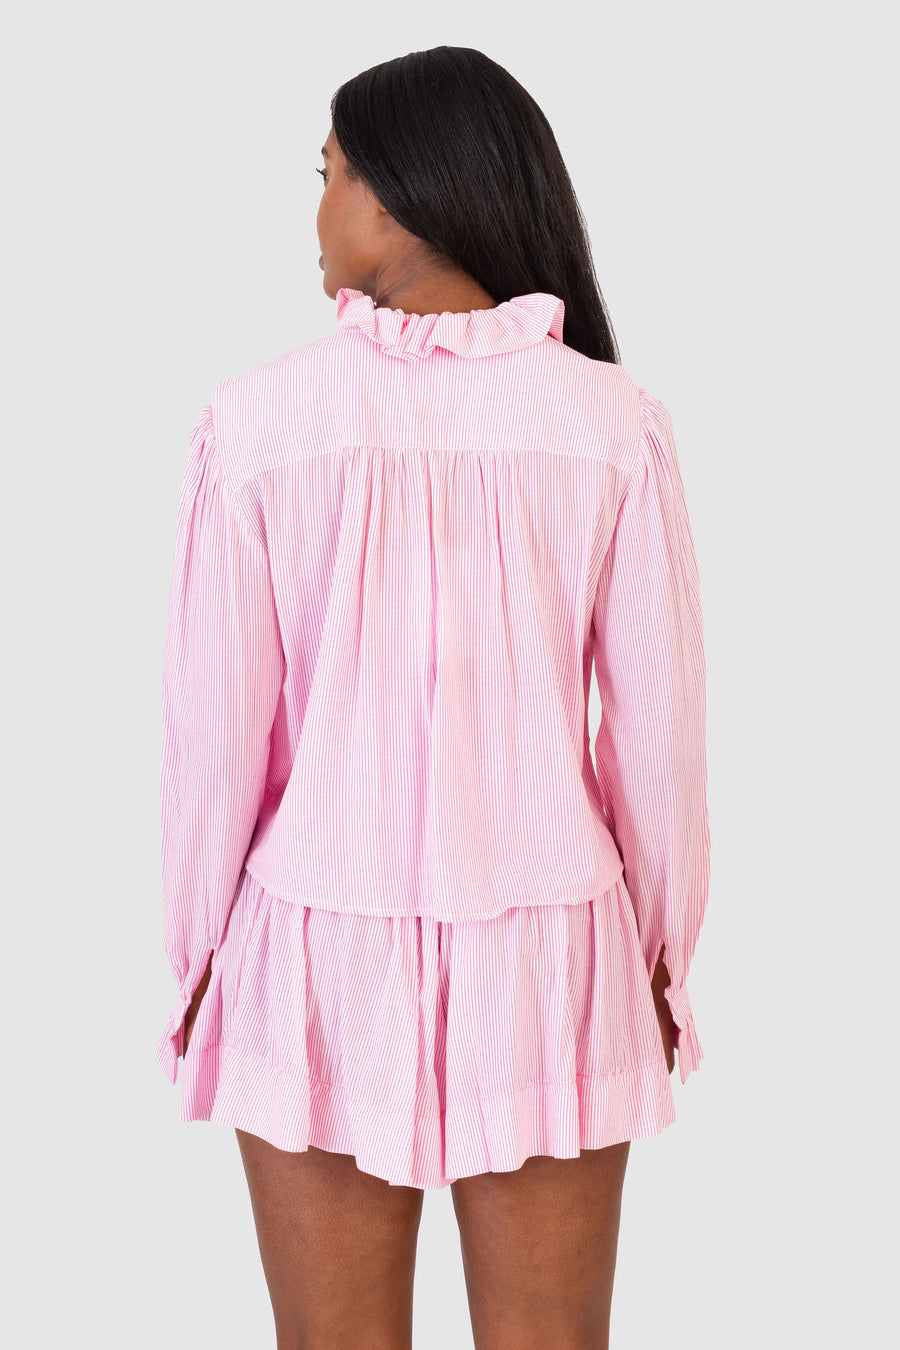 Penelope Top Hot Pink Stripe *Limited*Edition*